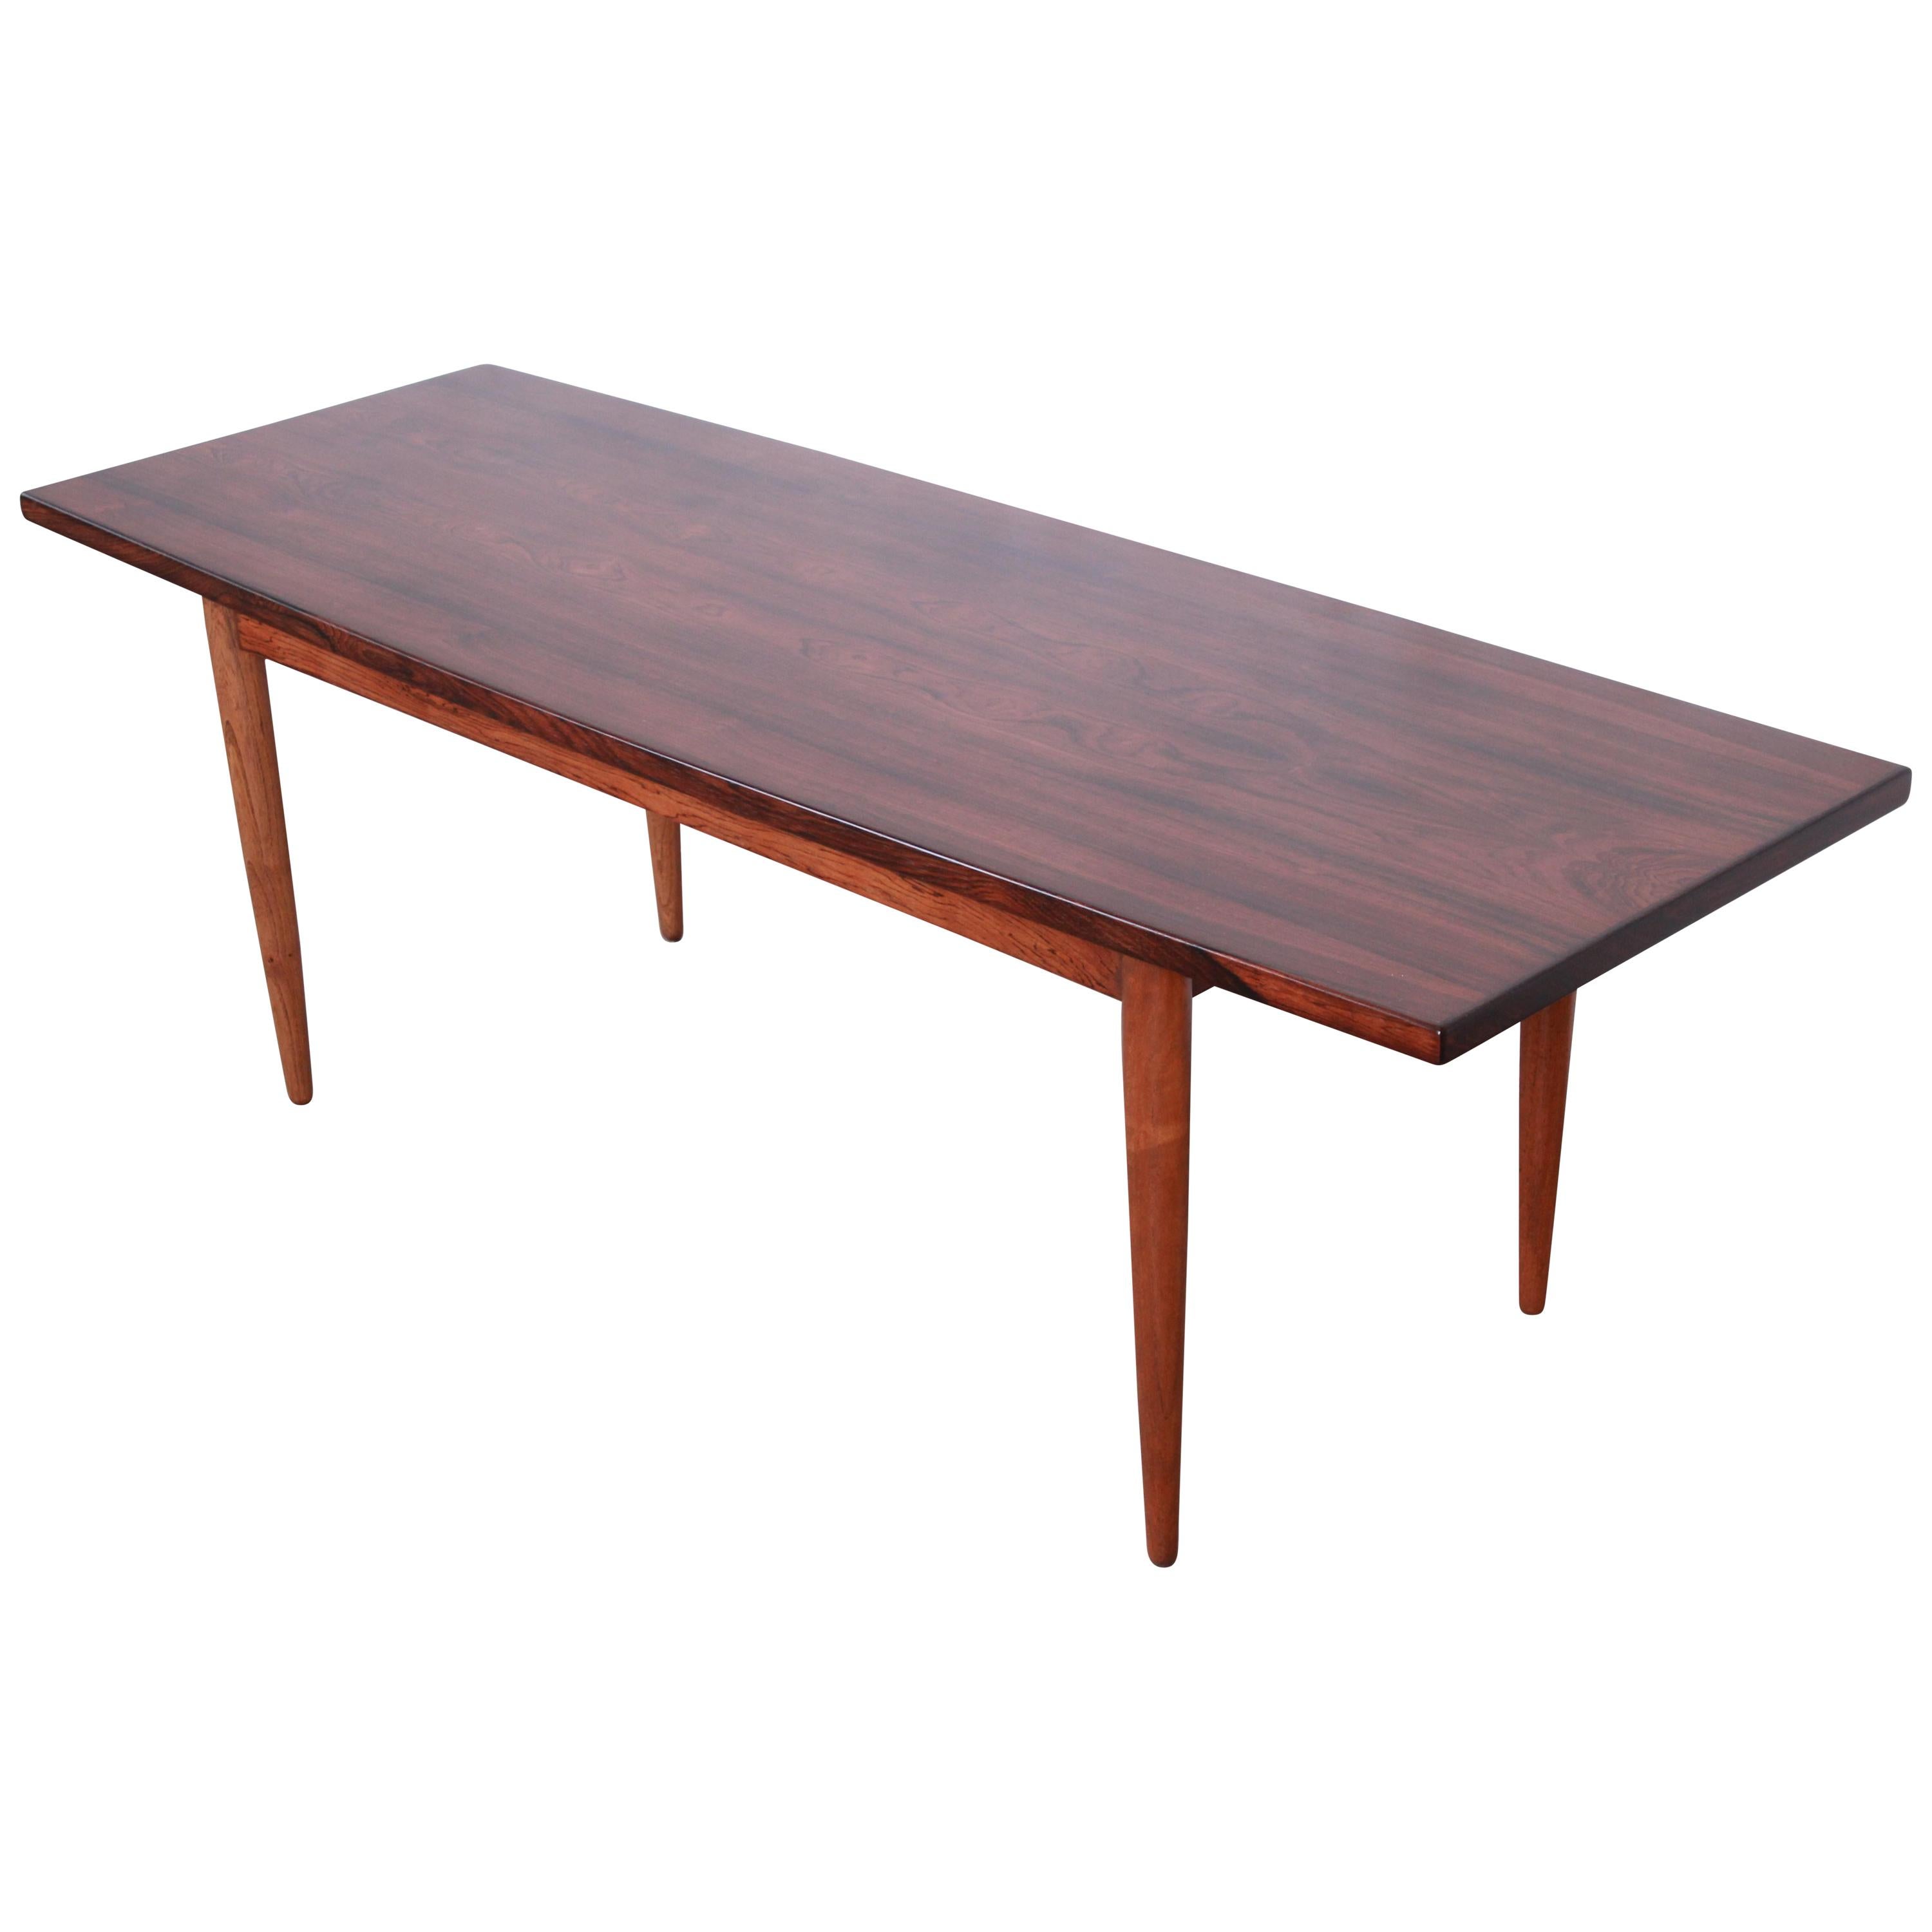 Danish Modern Rosewood Coffee Table, Newly Refinished